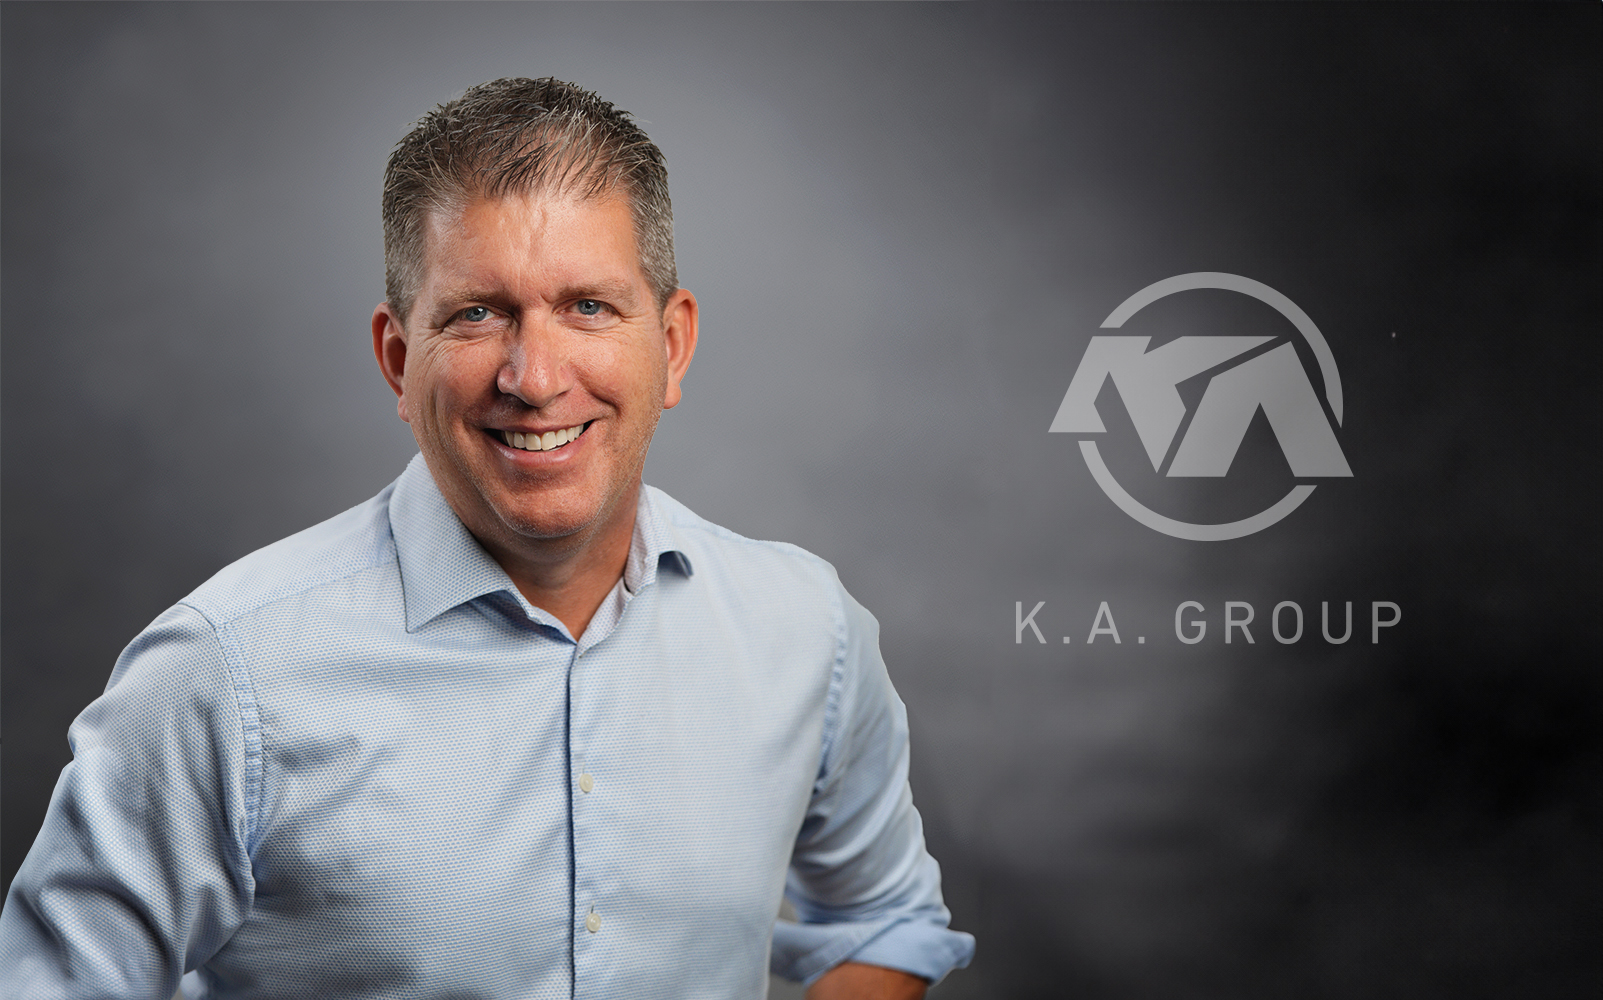 K.A. Group appoints Daniel Pashniak as new President & CEO featured image